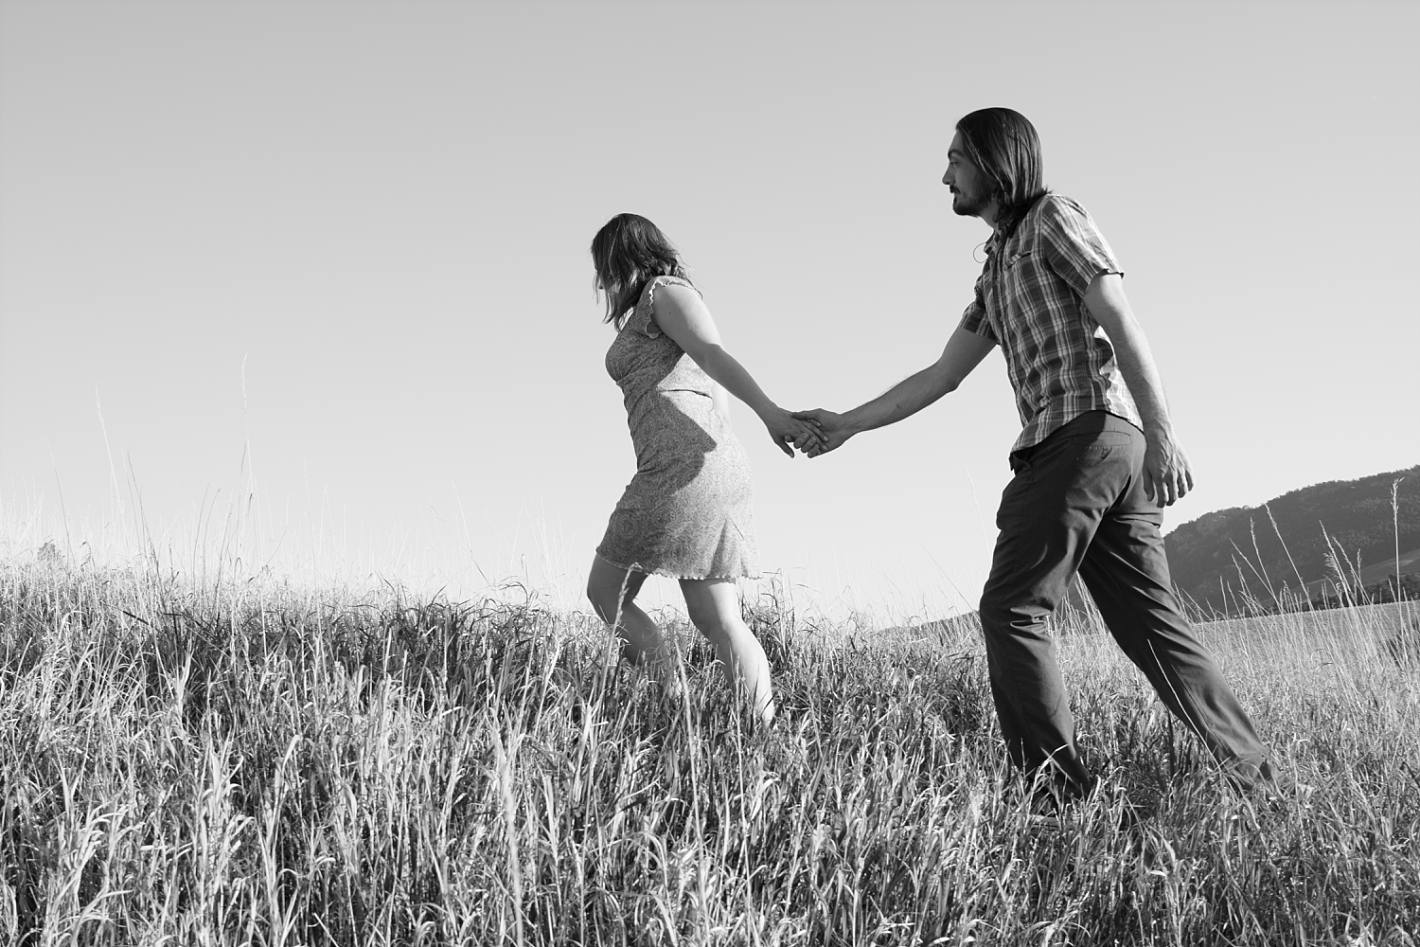 Woman leading man through grass, black and white engagement photography